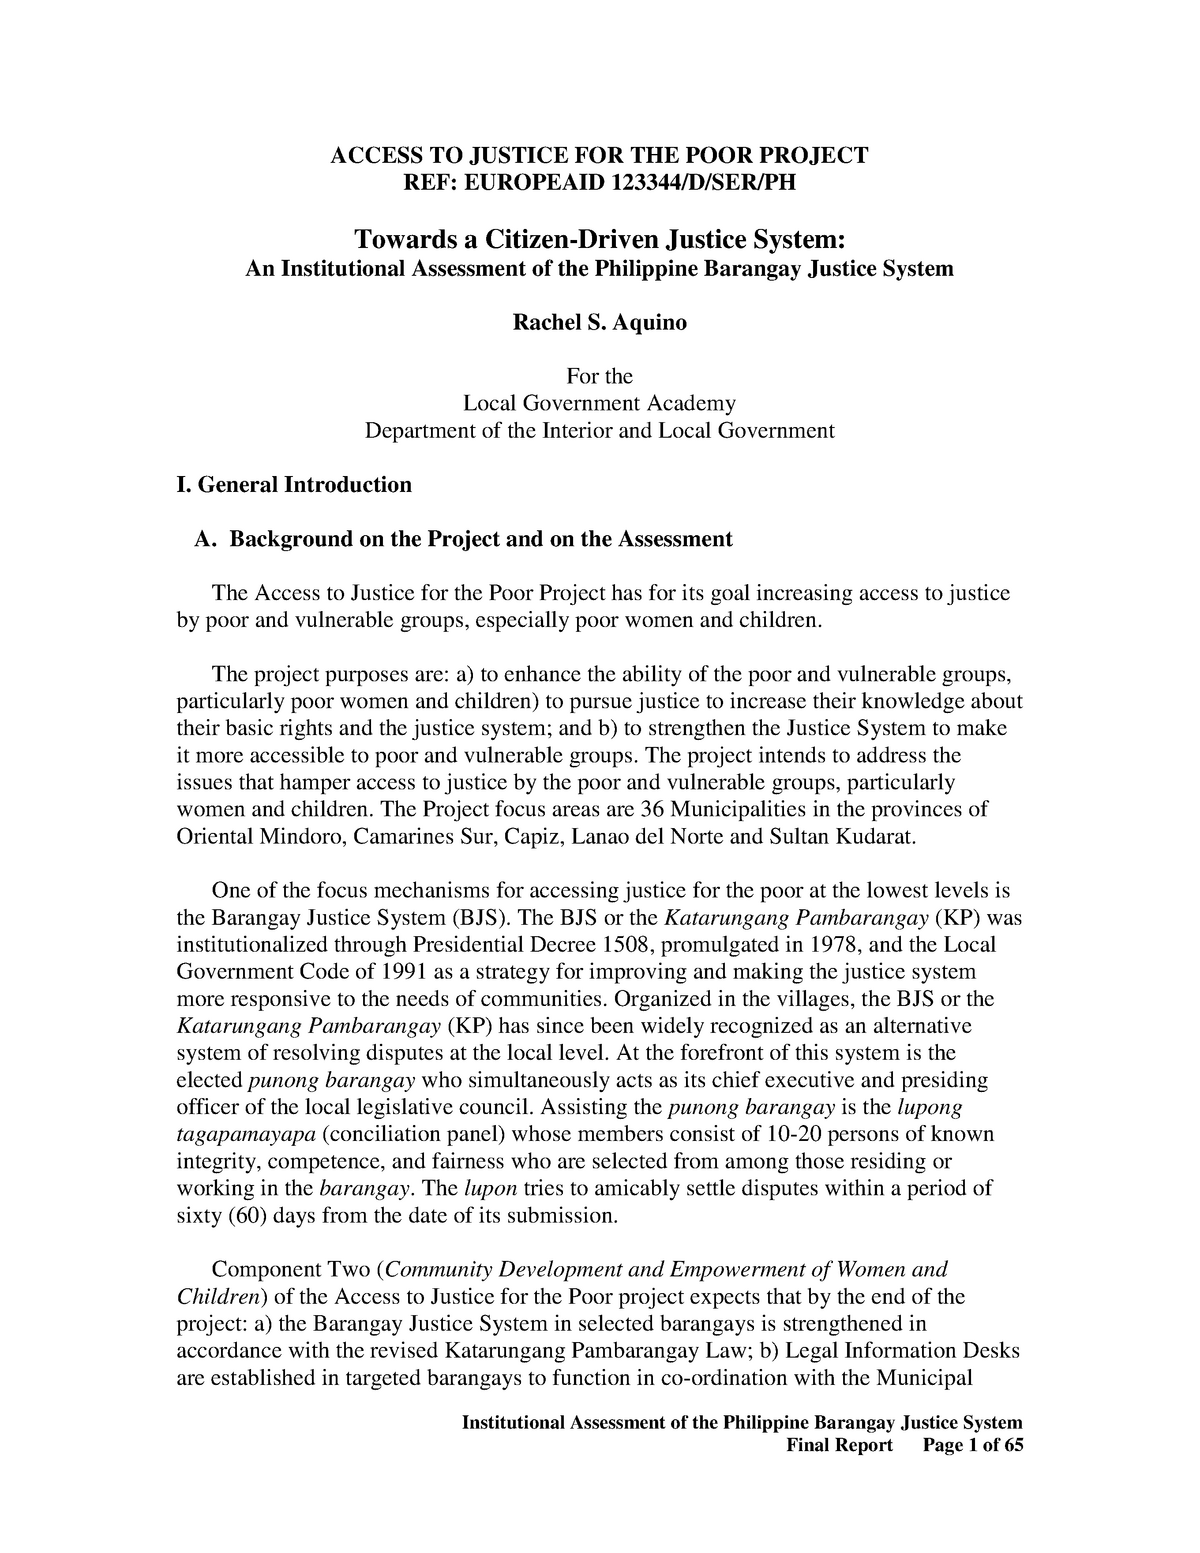 Environmental Engineering - Institutional Assessment of the Philippine ...